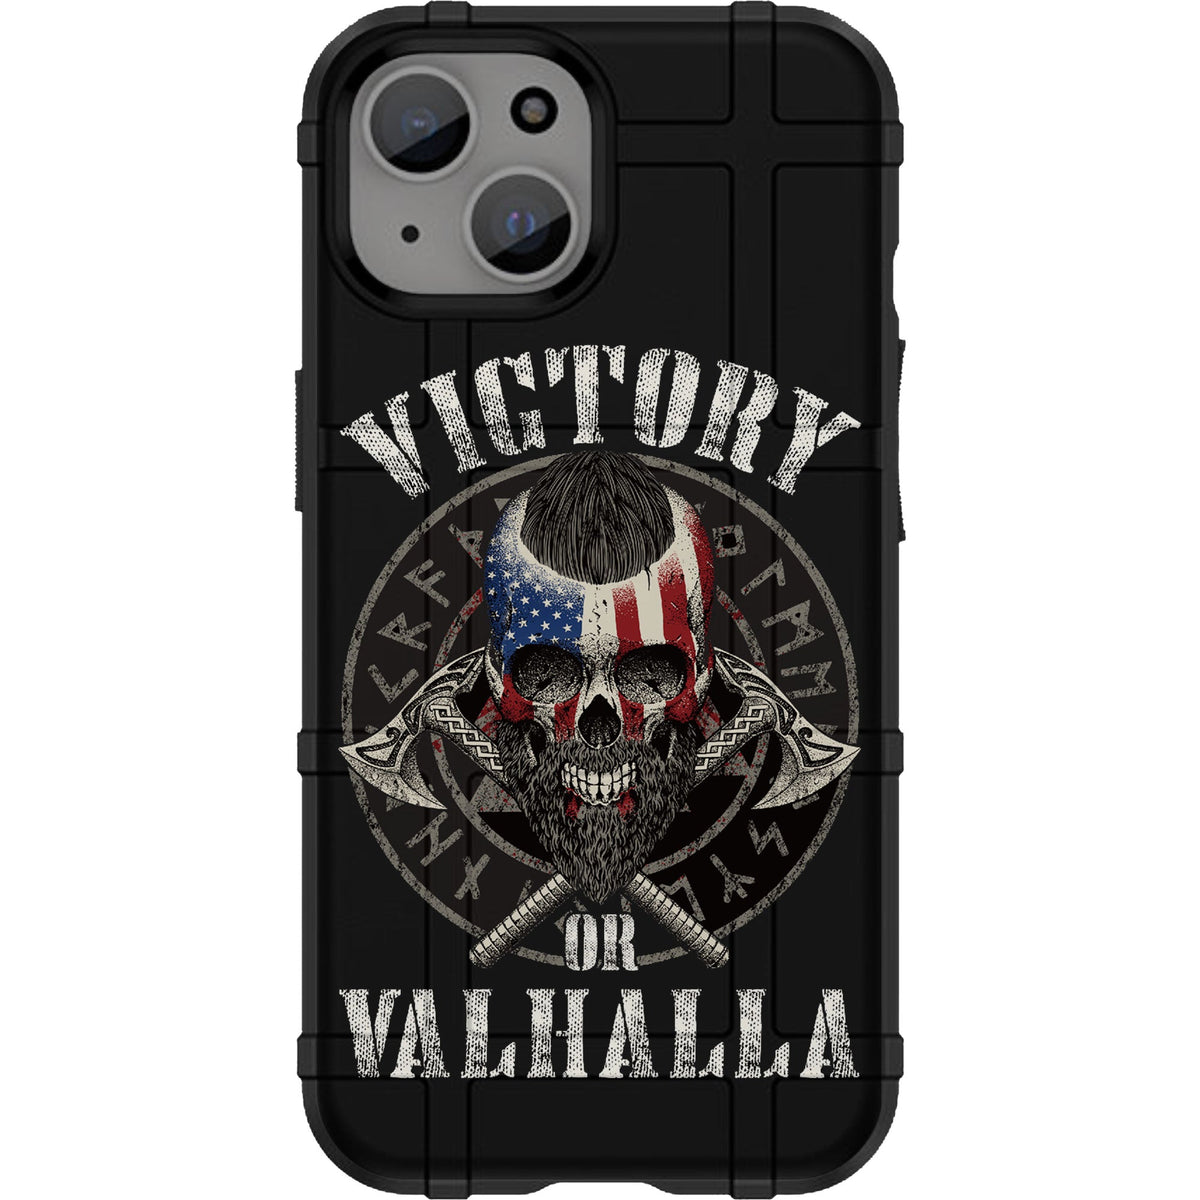 Warrior 12 "Victory or Valhalla" Custom Printed Android & Apple Phone Cases